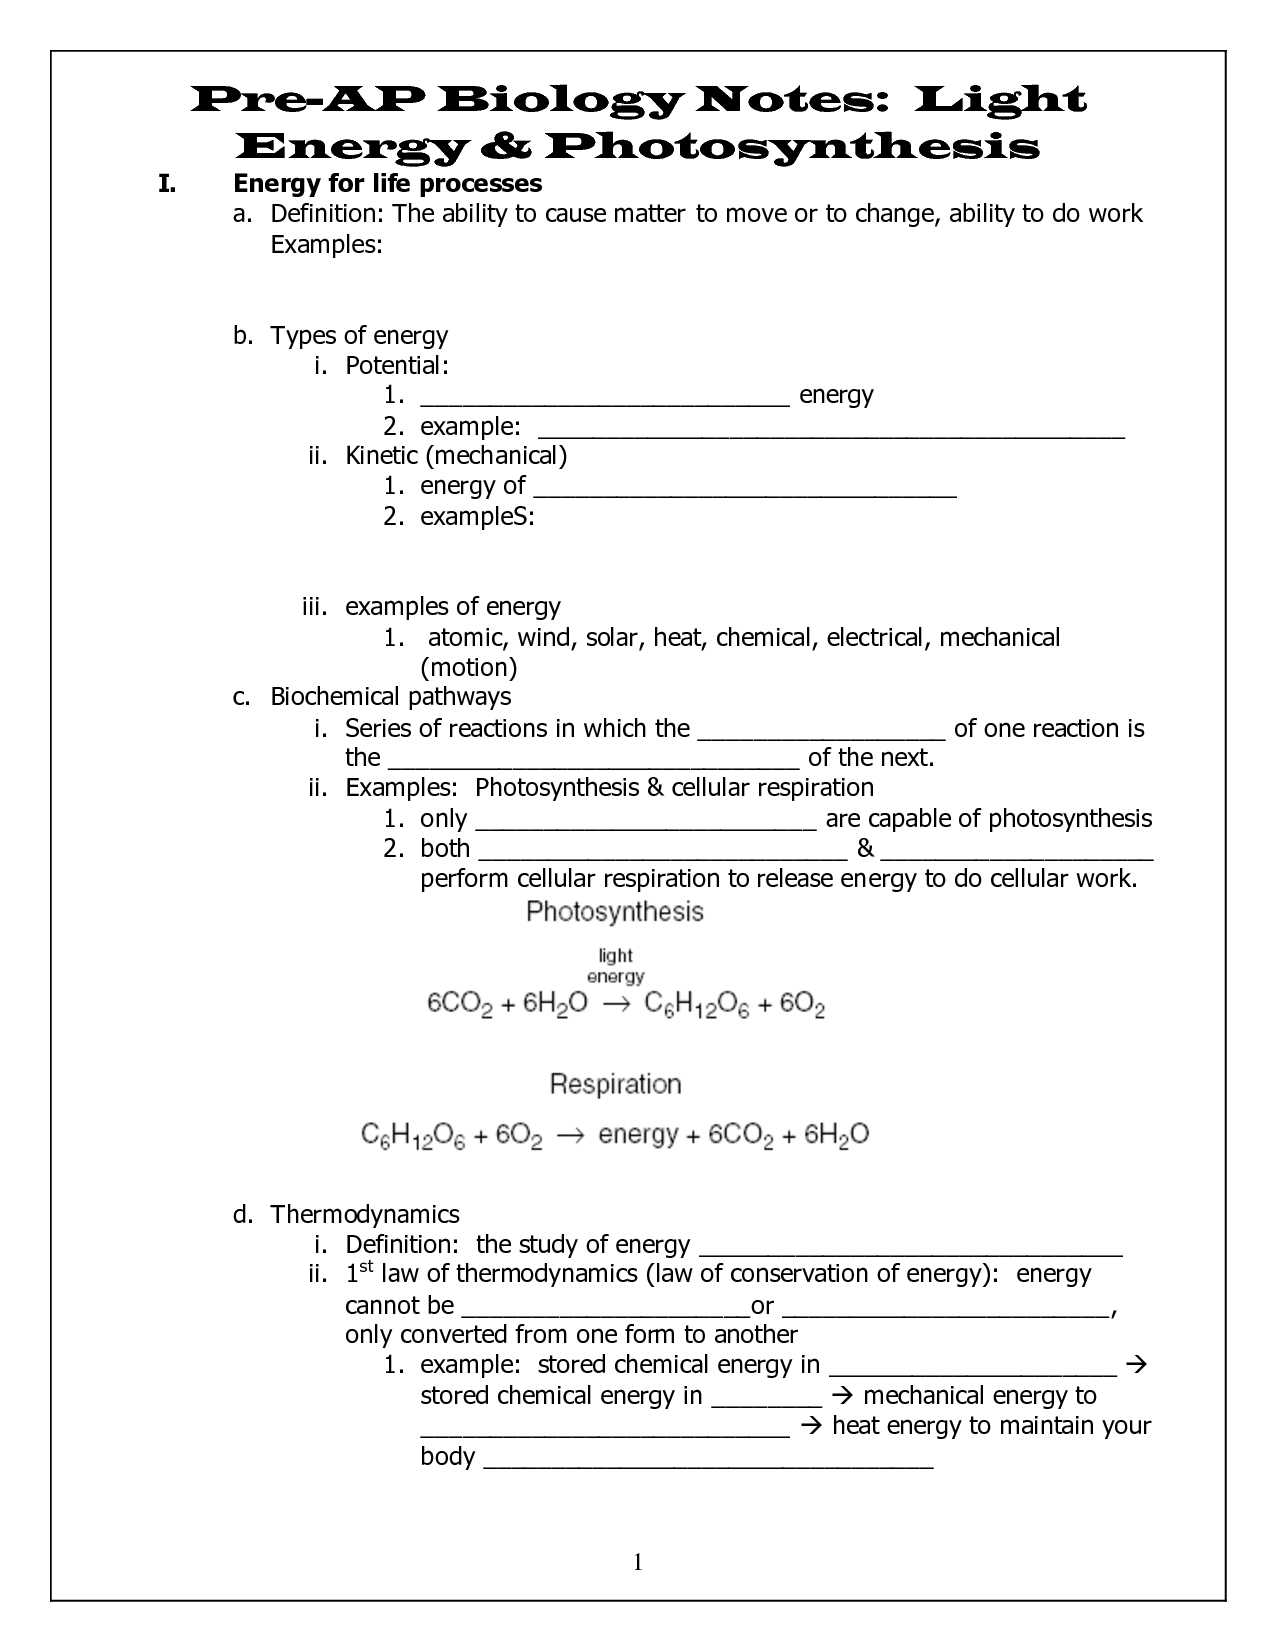 Photosynthesis and Cellular Respiration Review Worksheet Answer Key with Bio Worksheet the Best Worksheets Image Collection